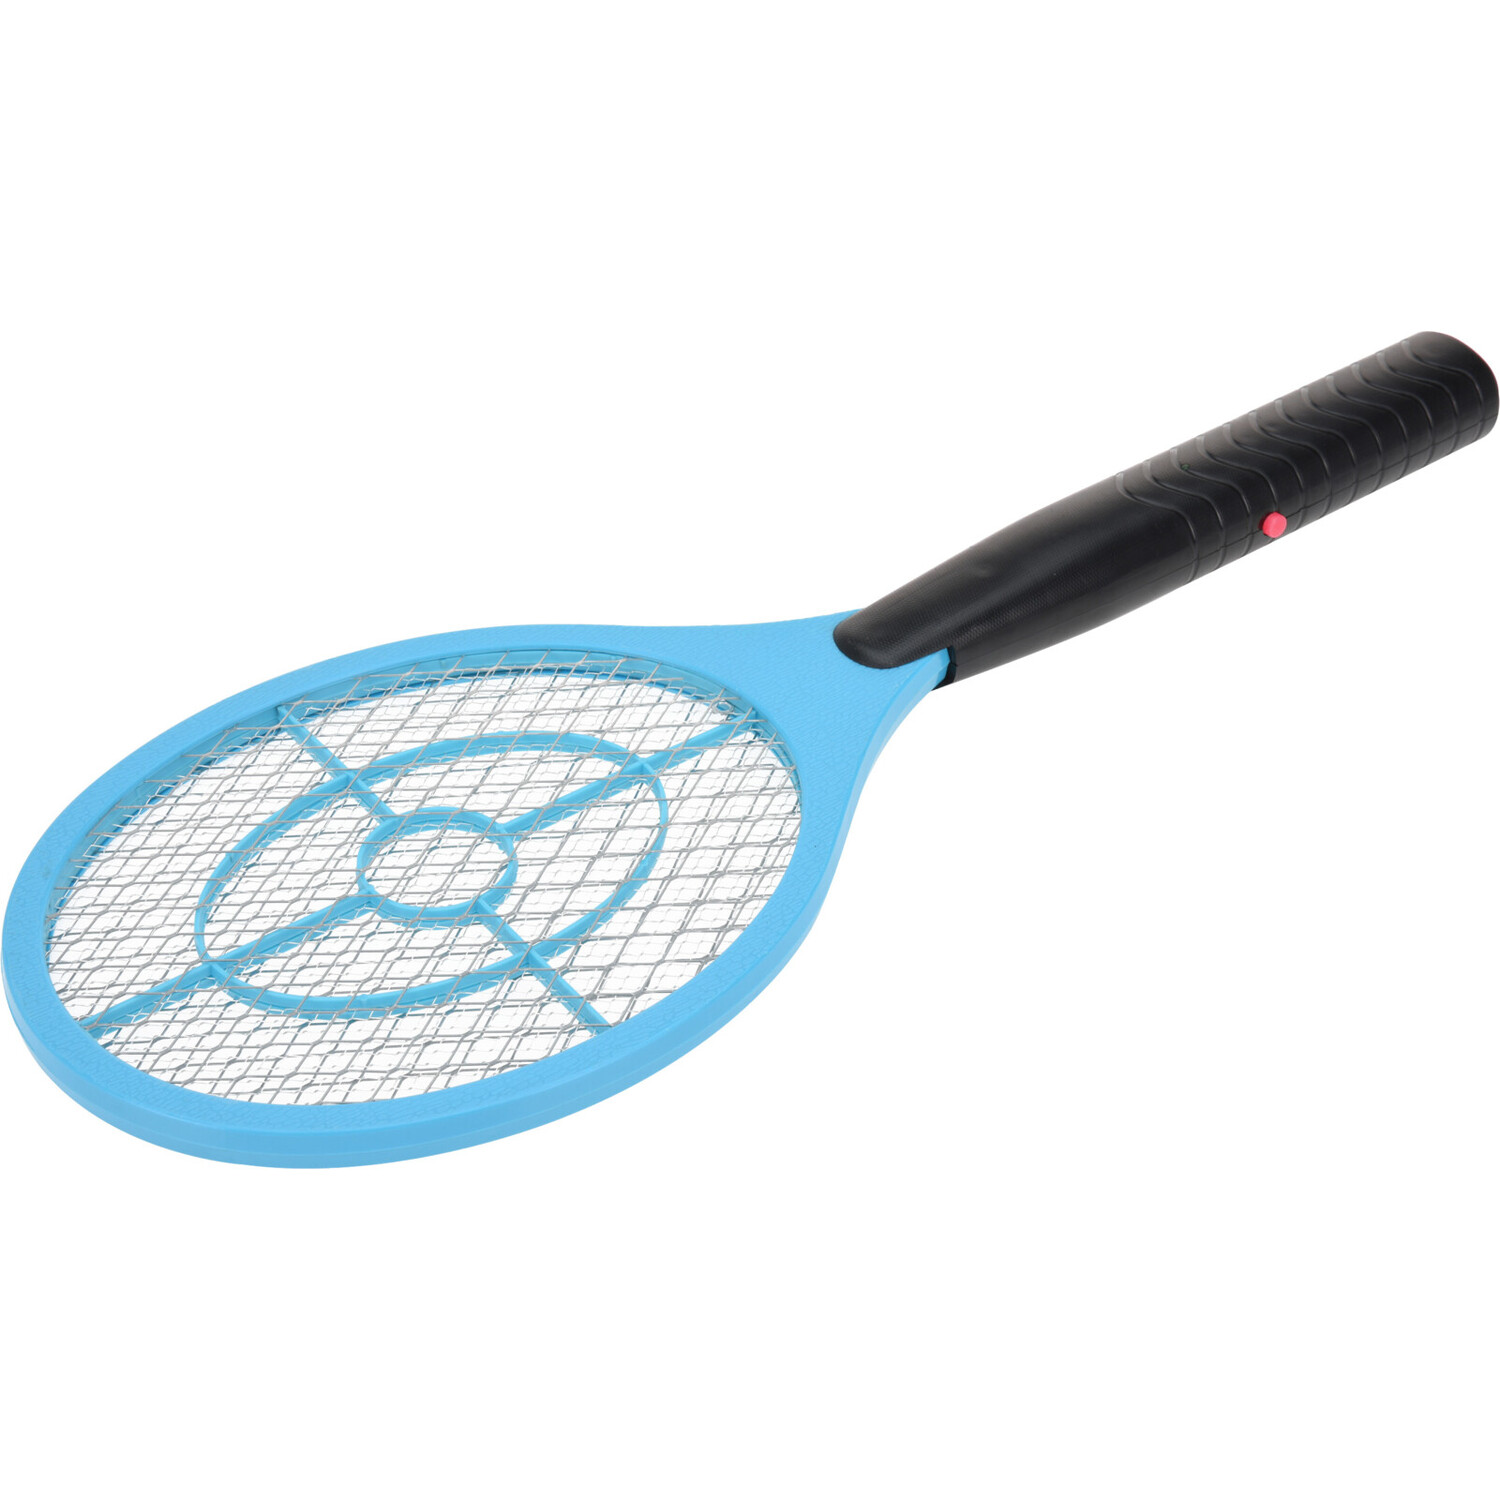 Fly Swatter Electrical Image 1